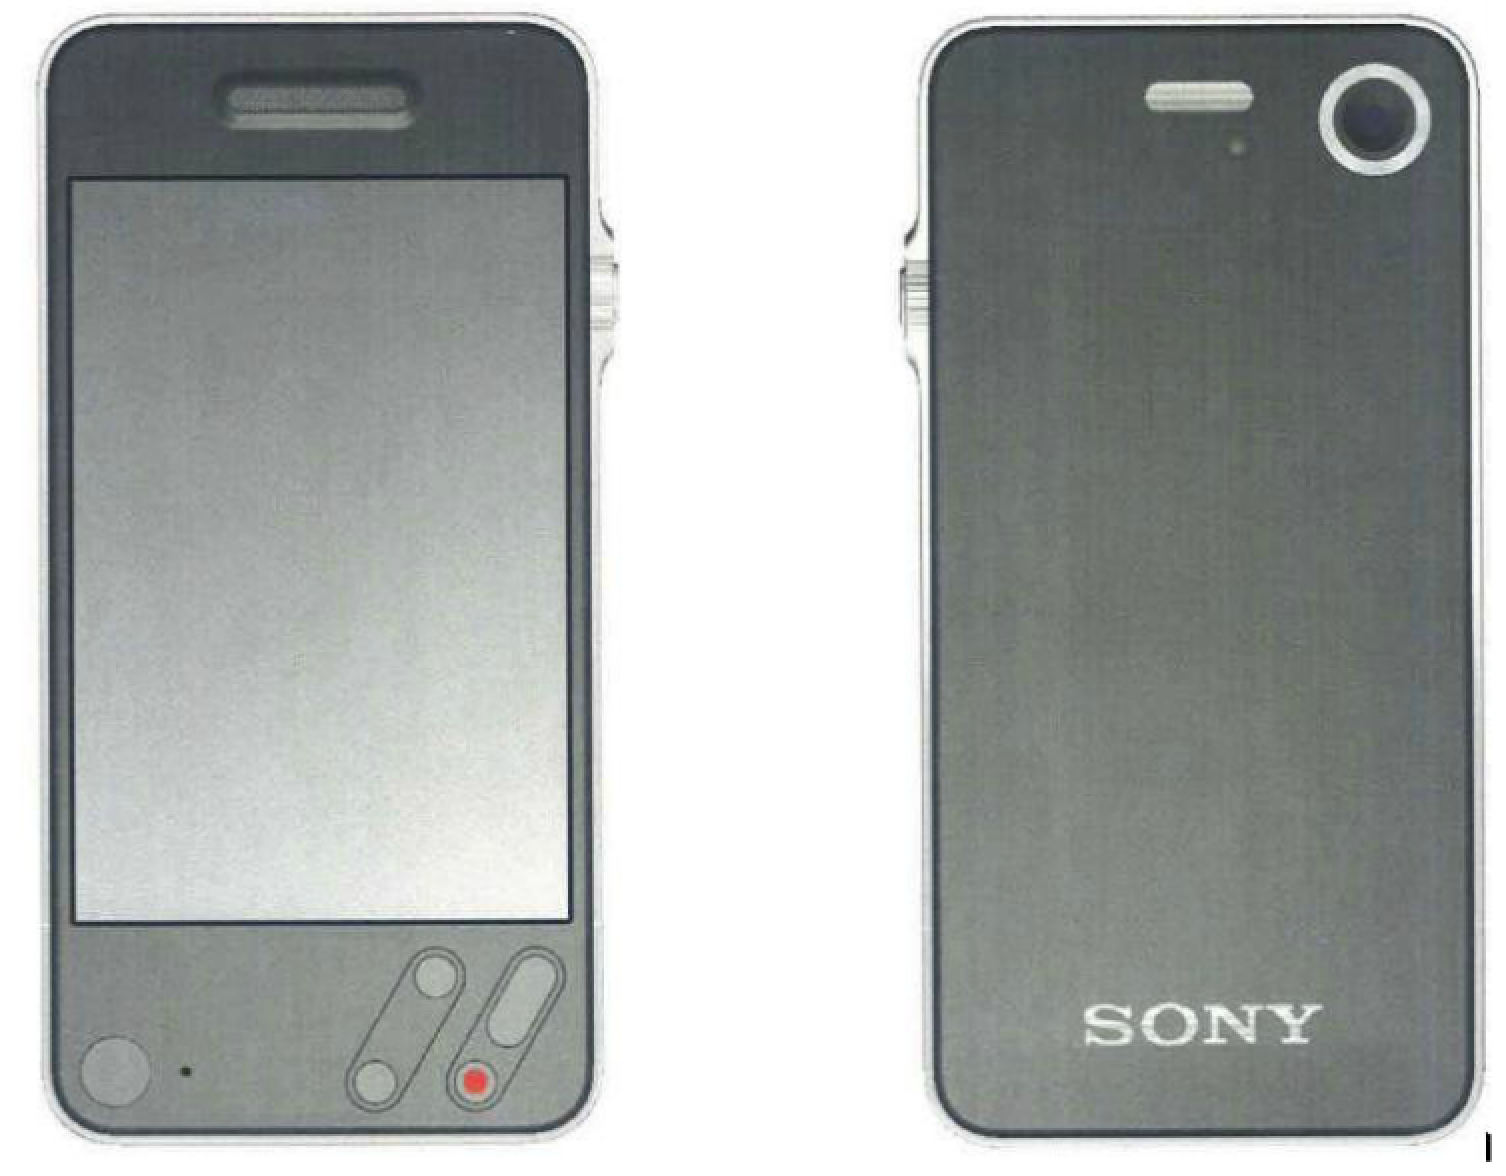 Samsung Claims iPhone Design Was Stolen From Sony [Photos]